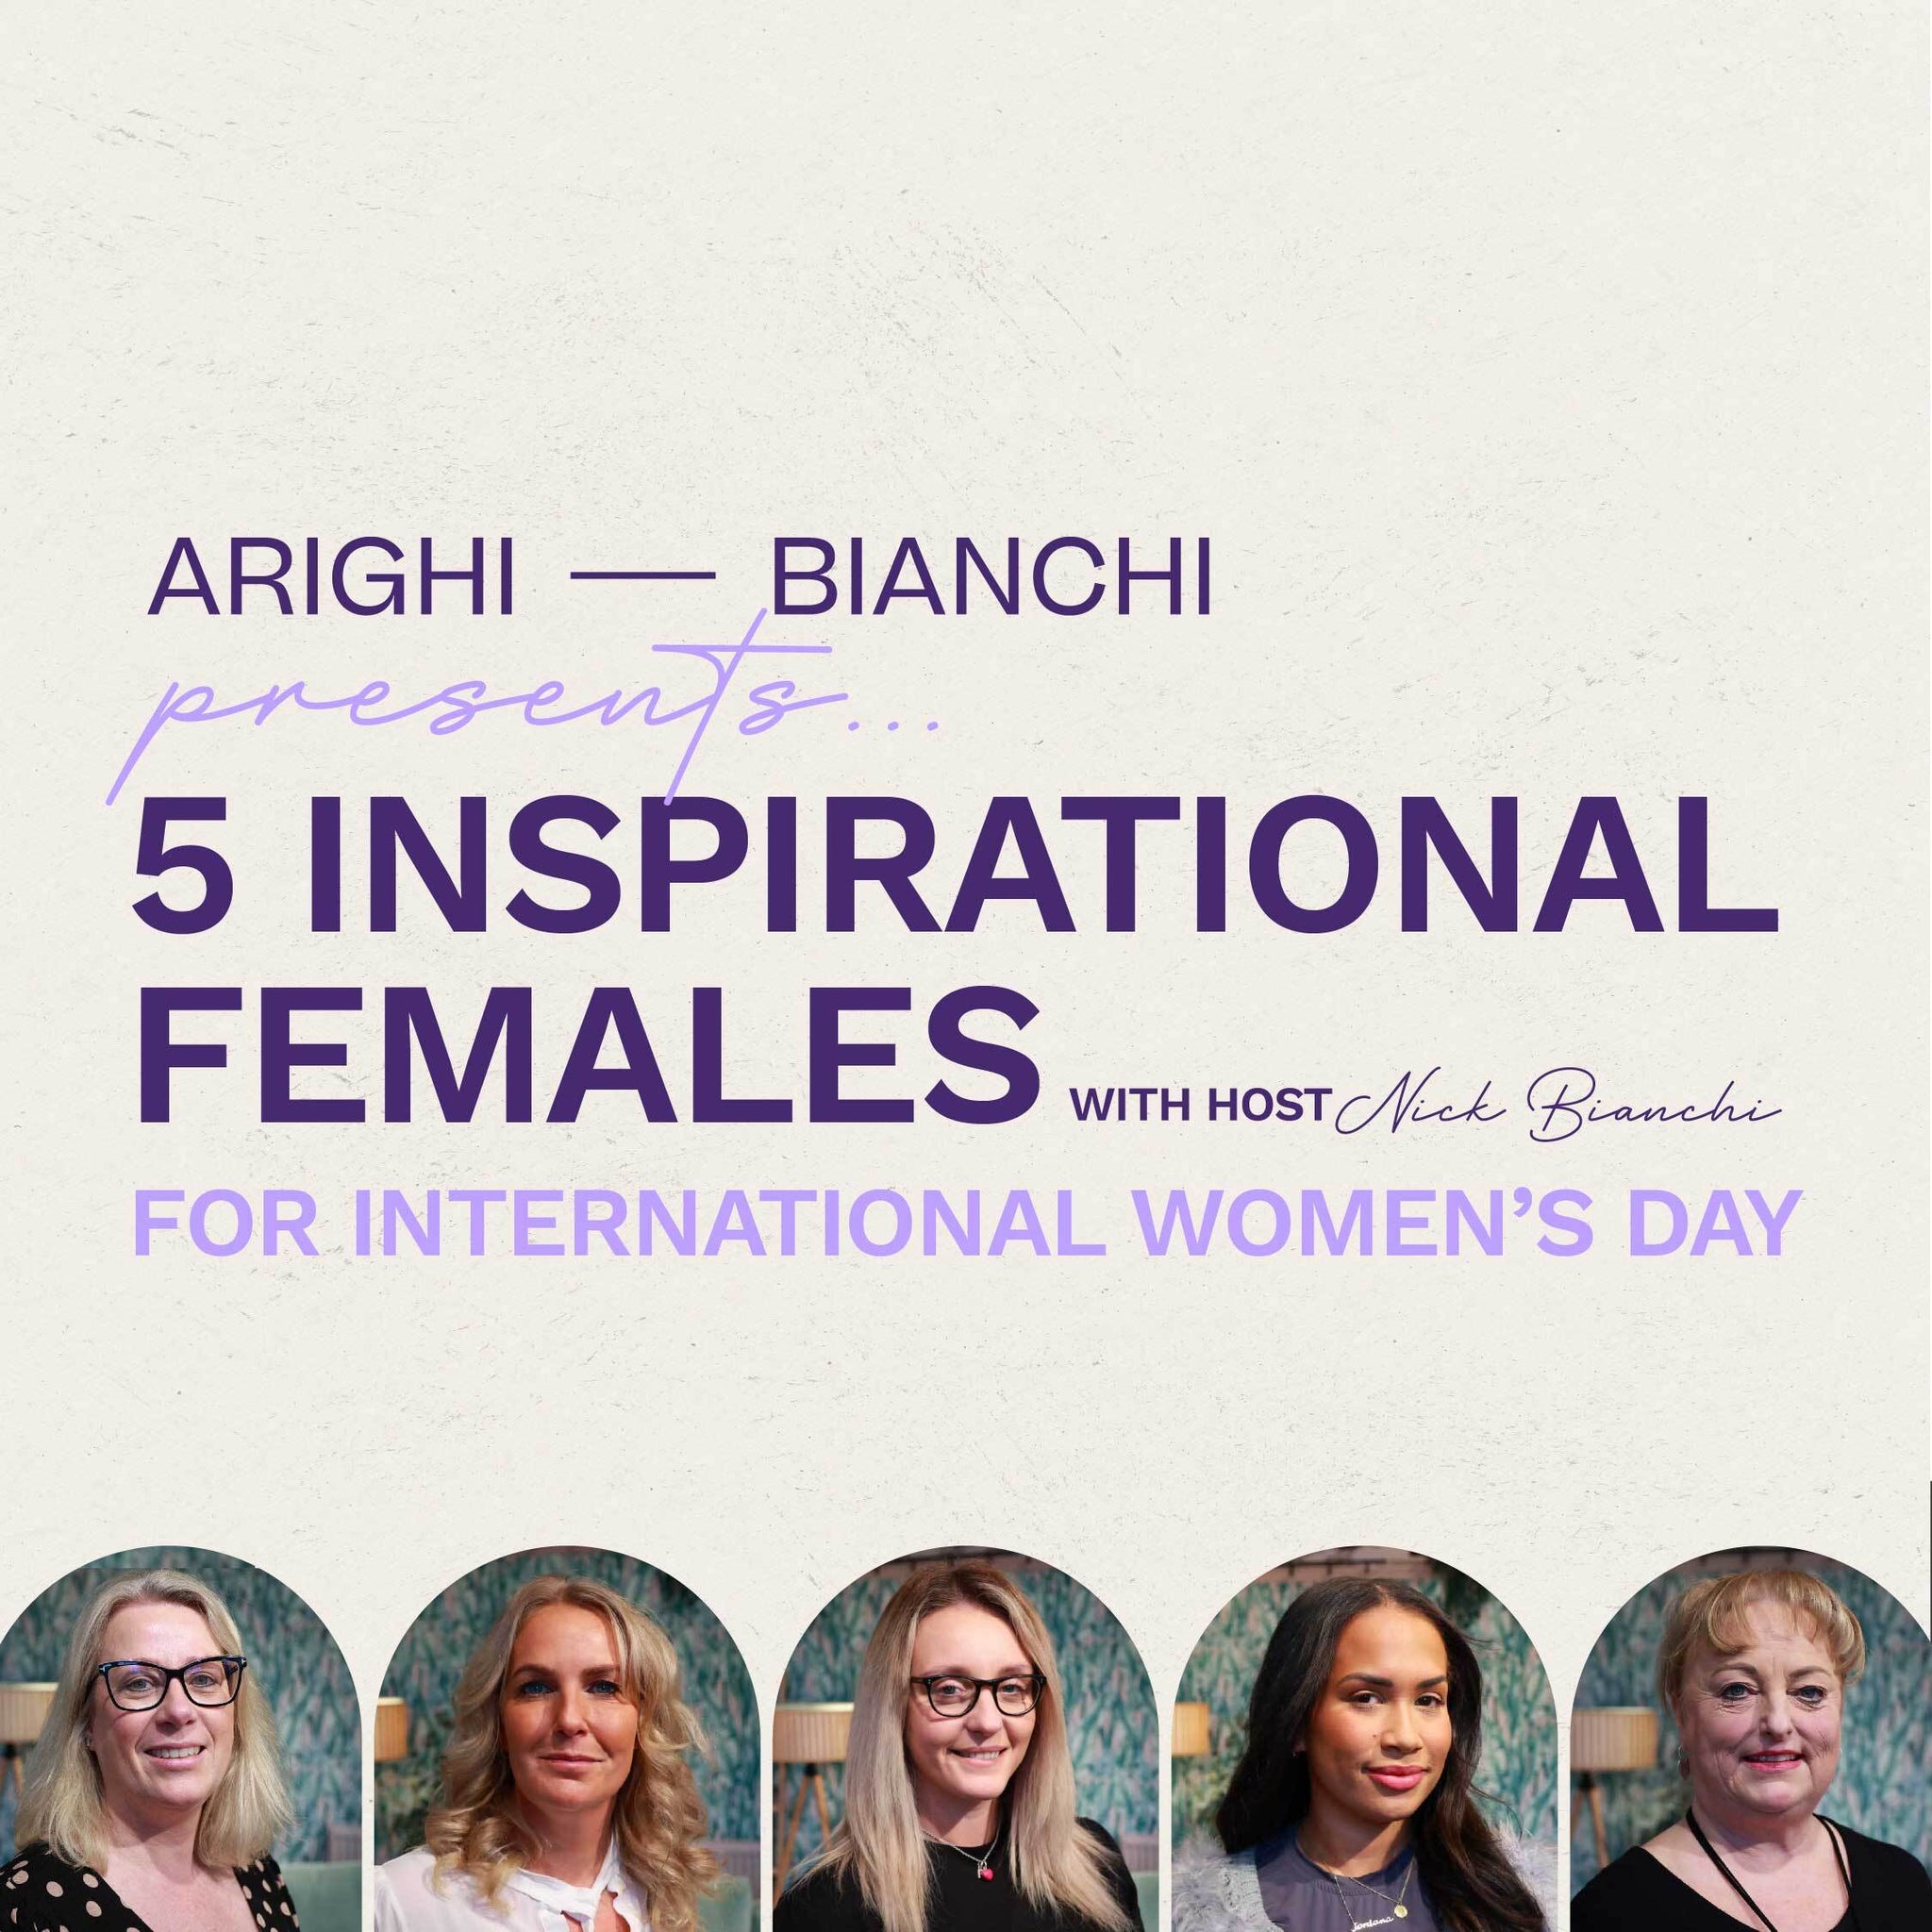 Arighi Bianchi Presents... 5 Inspirational Females for International Women's Day with host Nick Bianchi